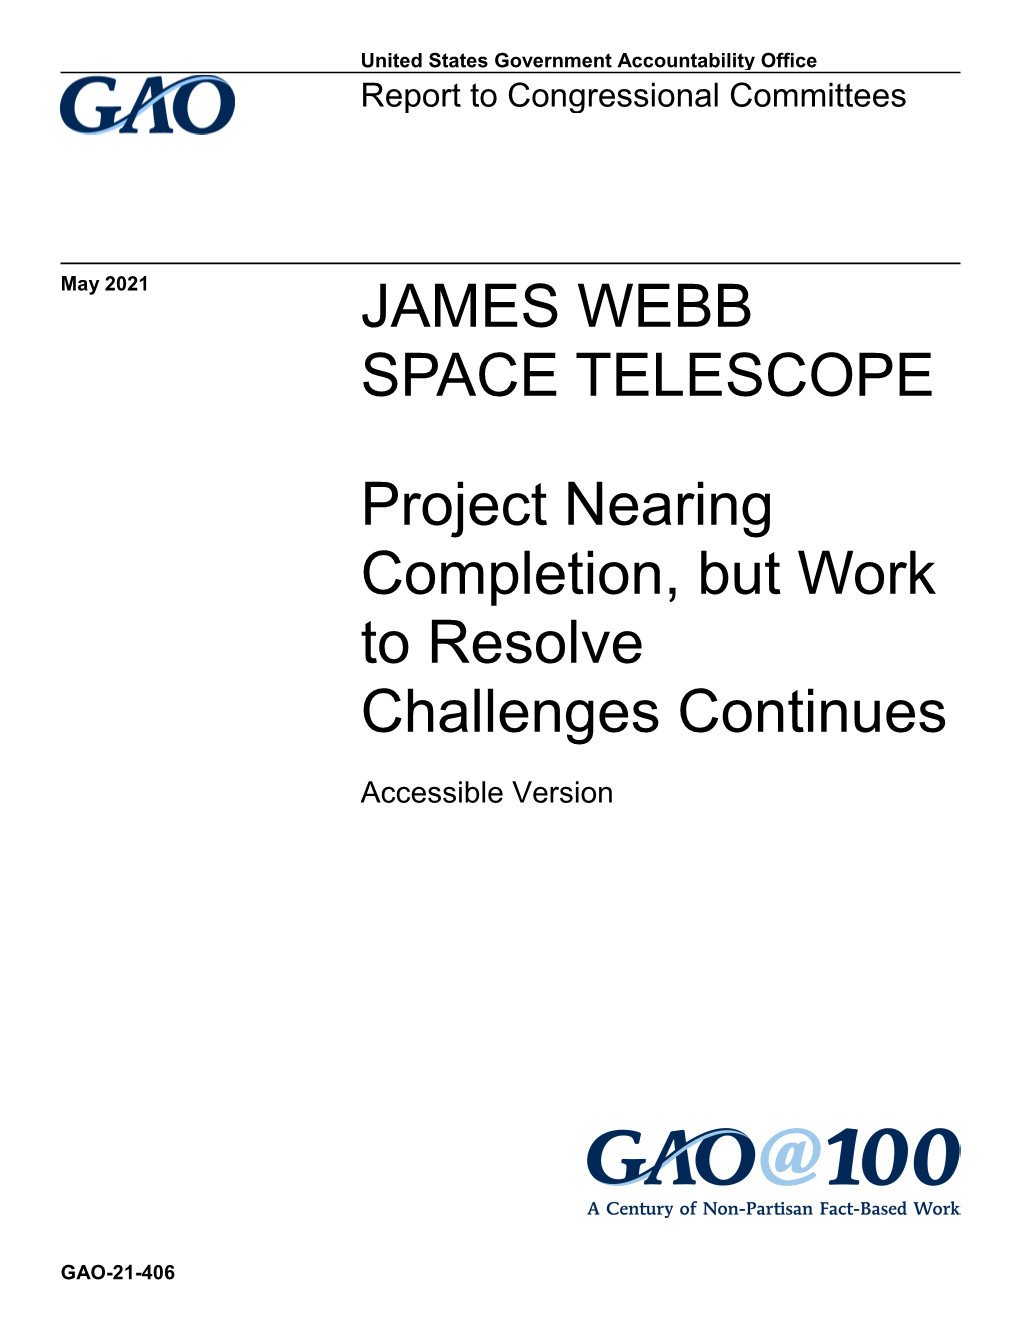 GAO-21-406, Accessible Version, JAMES WEBB SPACE TELESCOPE